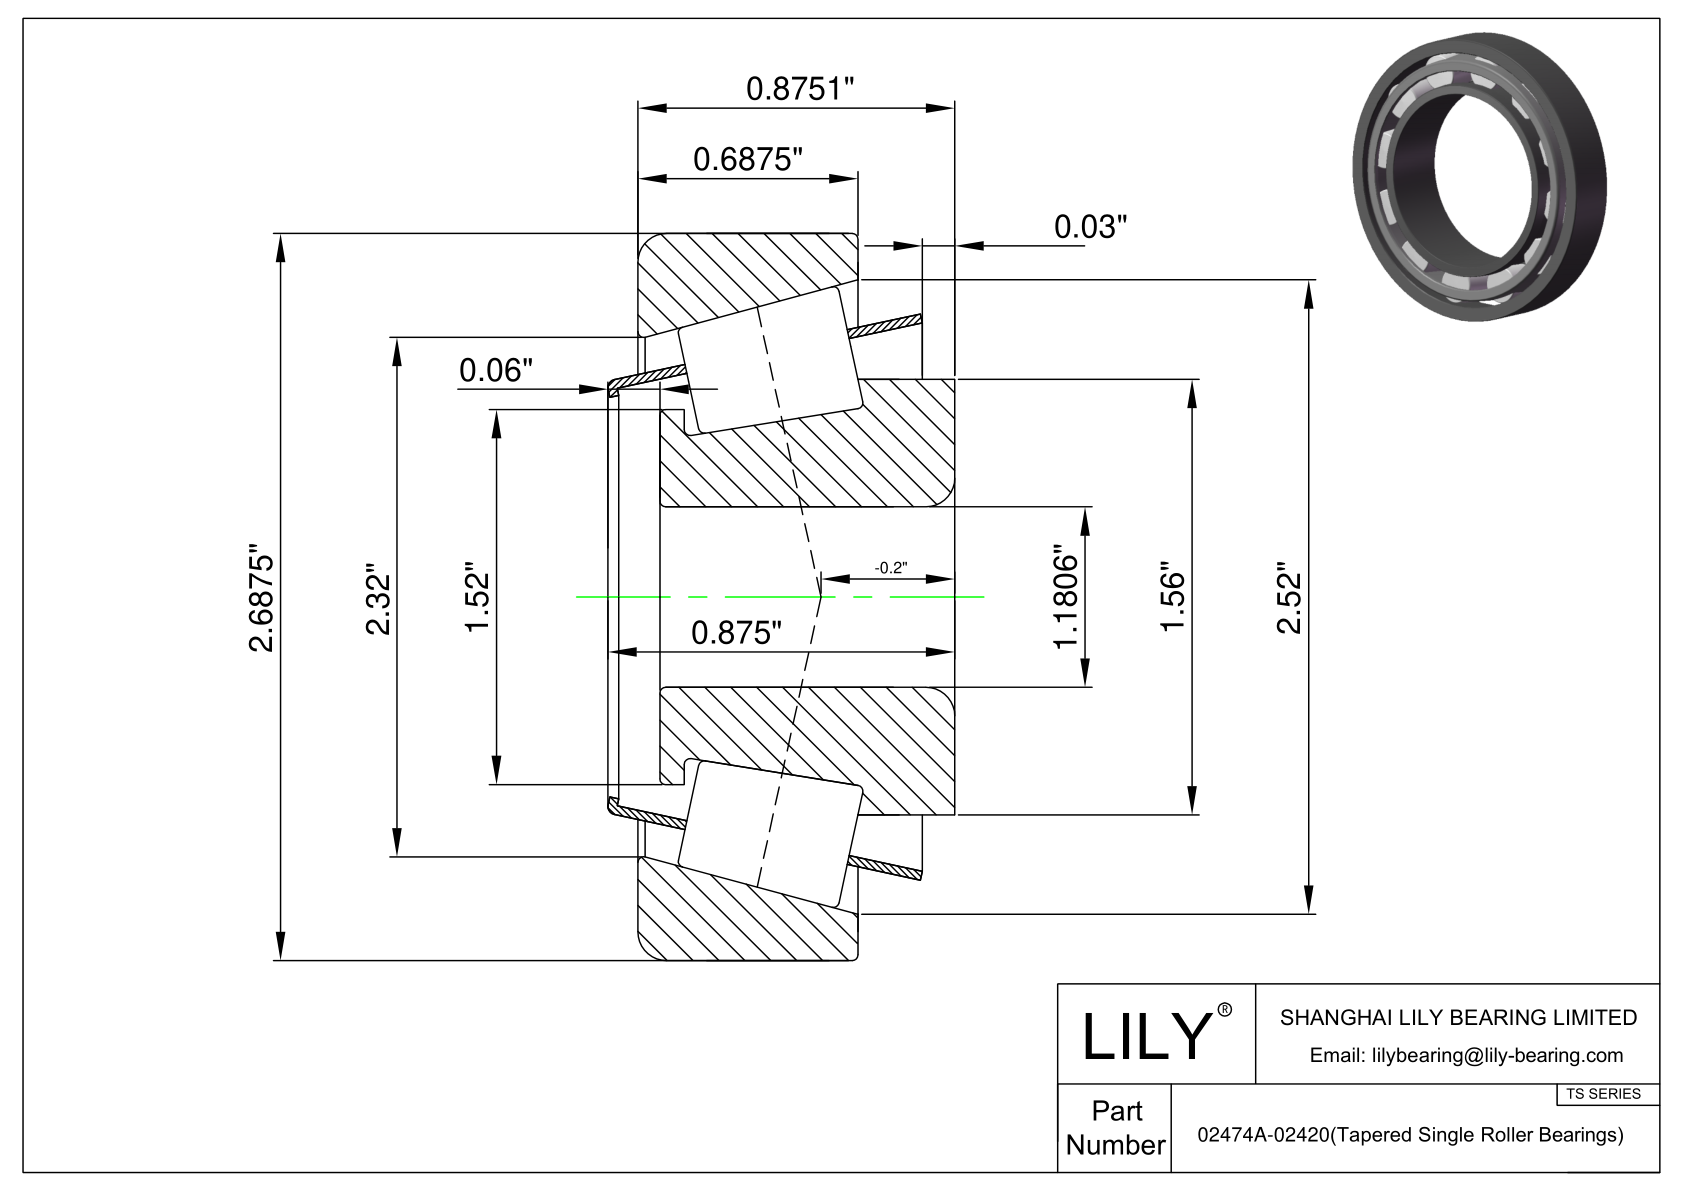 02474A-02420 TS (Tapered Single Roller Bearings) (Imperial) cad drawing